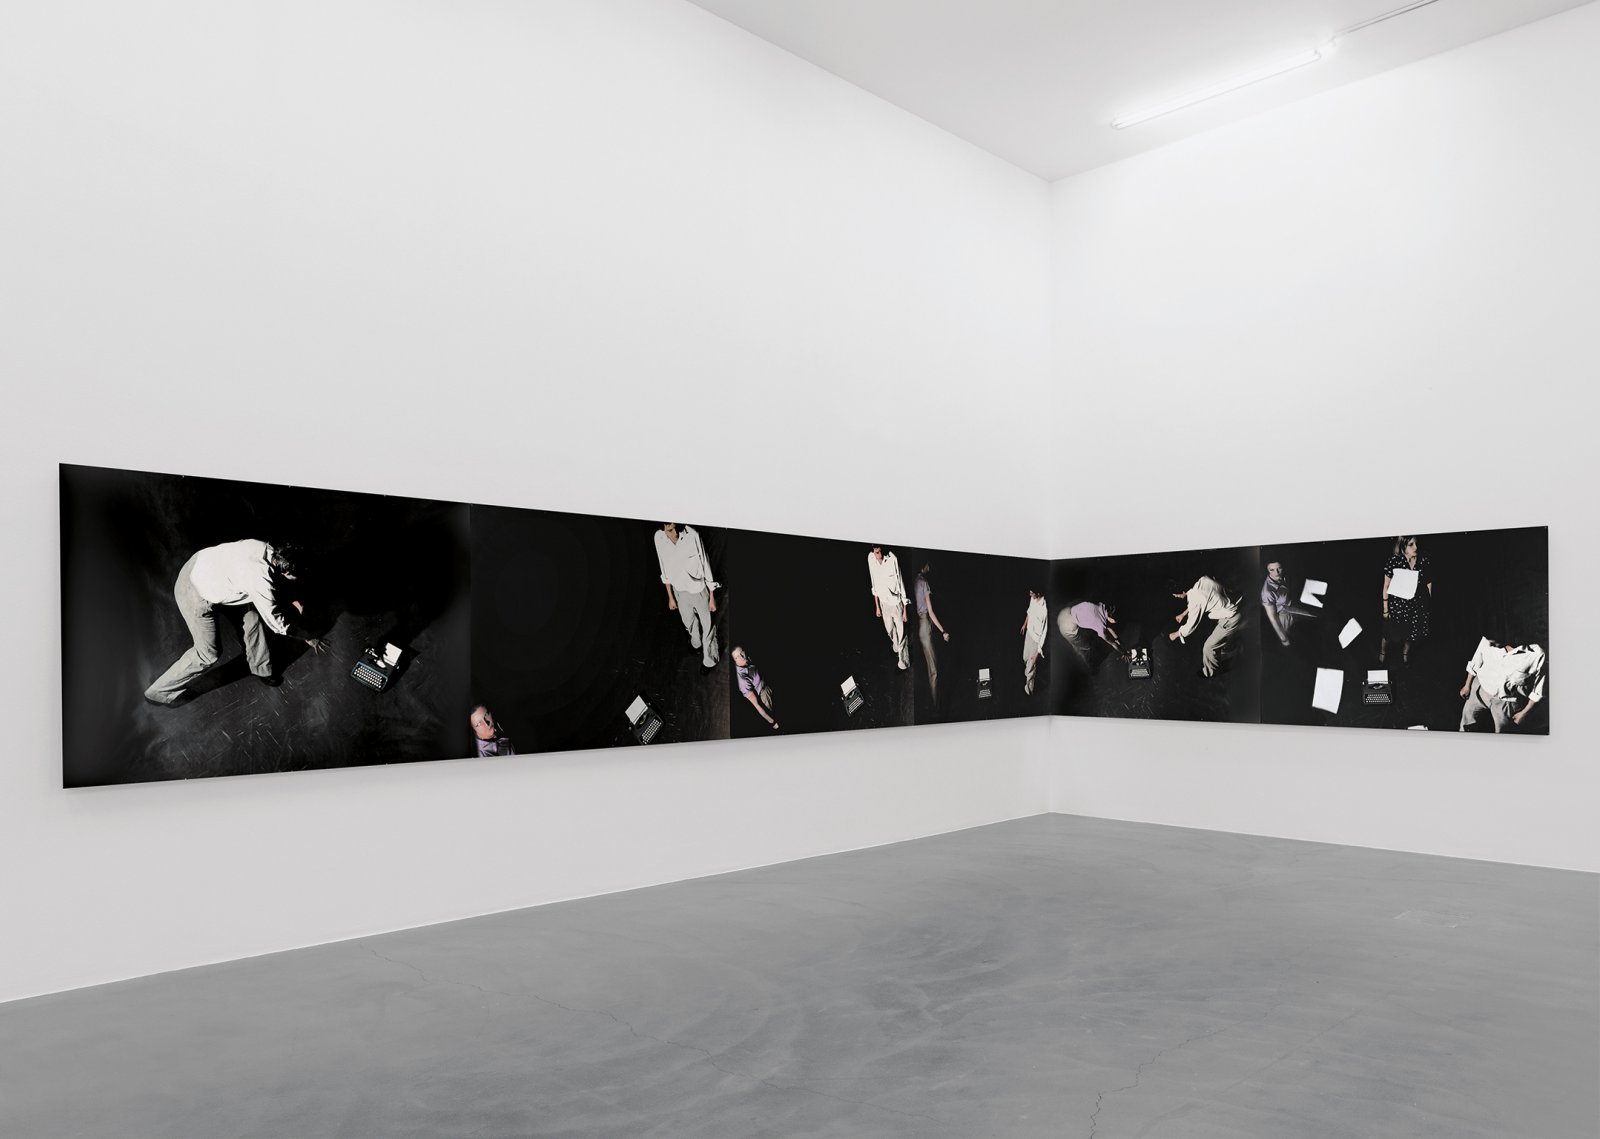 Ian Wallace, An Attack on Literature I &amp; II, 1975, 12 hand-coloured black and white photographs, each 48 x 69 in. (123 x 174 cm). Installation view, A Literature of Images, Kunsthalle Zürich, 2008